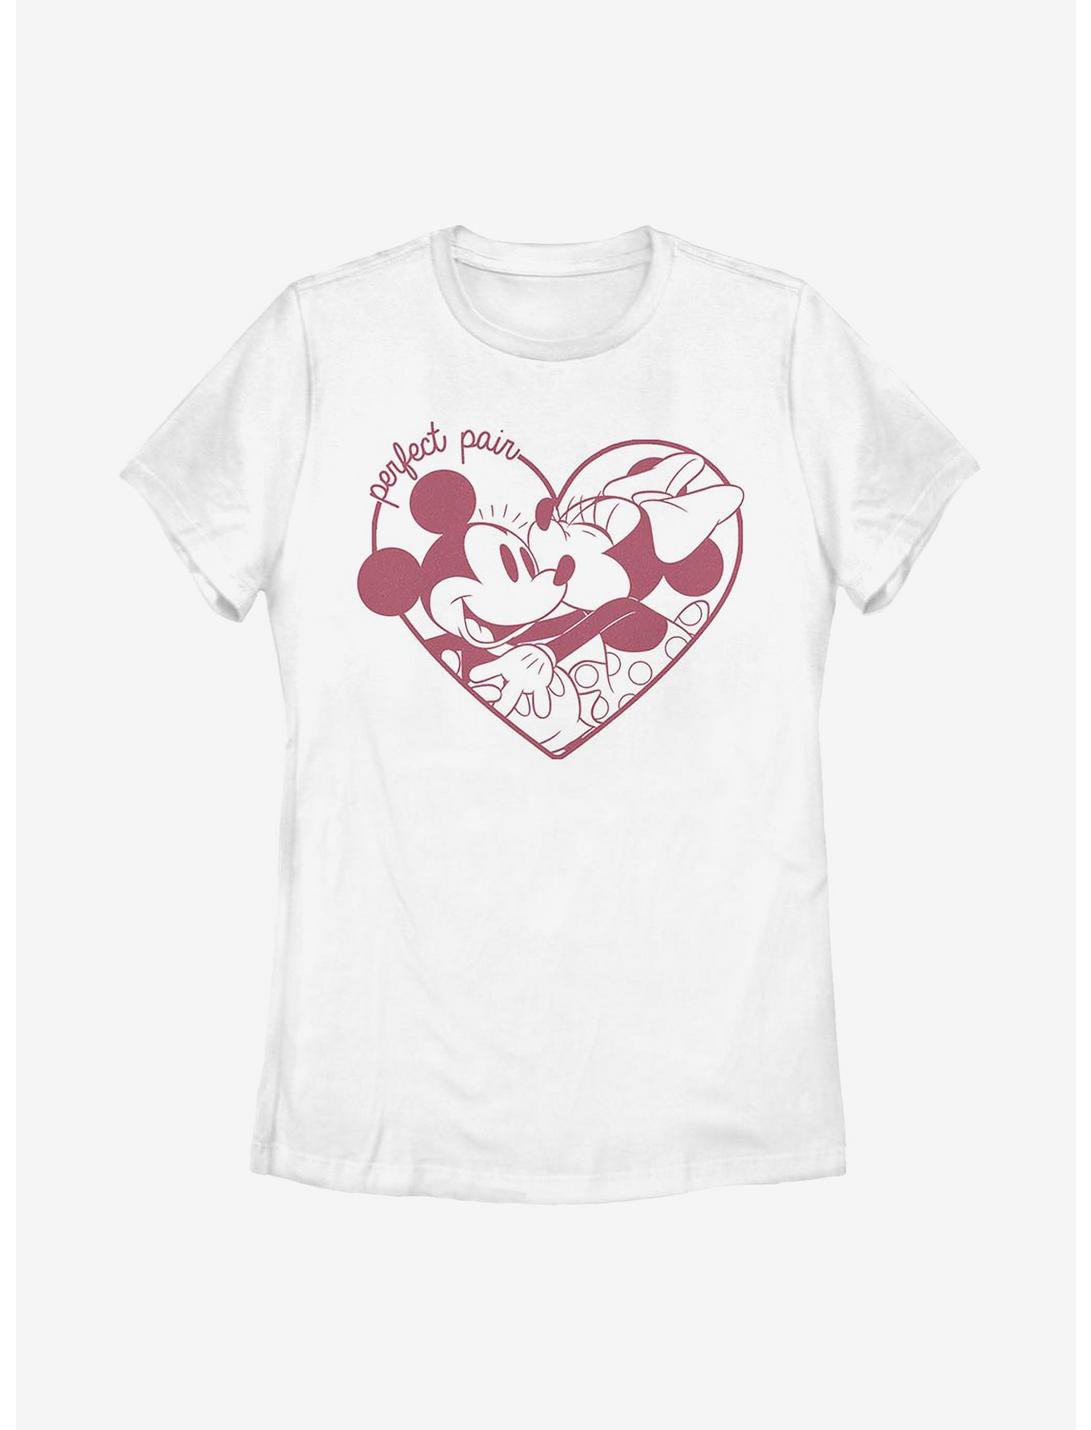 Disney Mickey Mouse Perfect Pair Womens T-Shirt, WHITE, hi-res